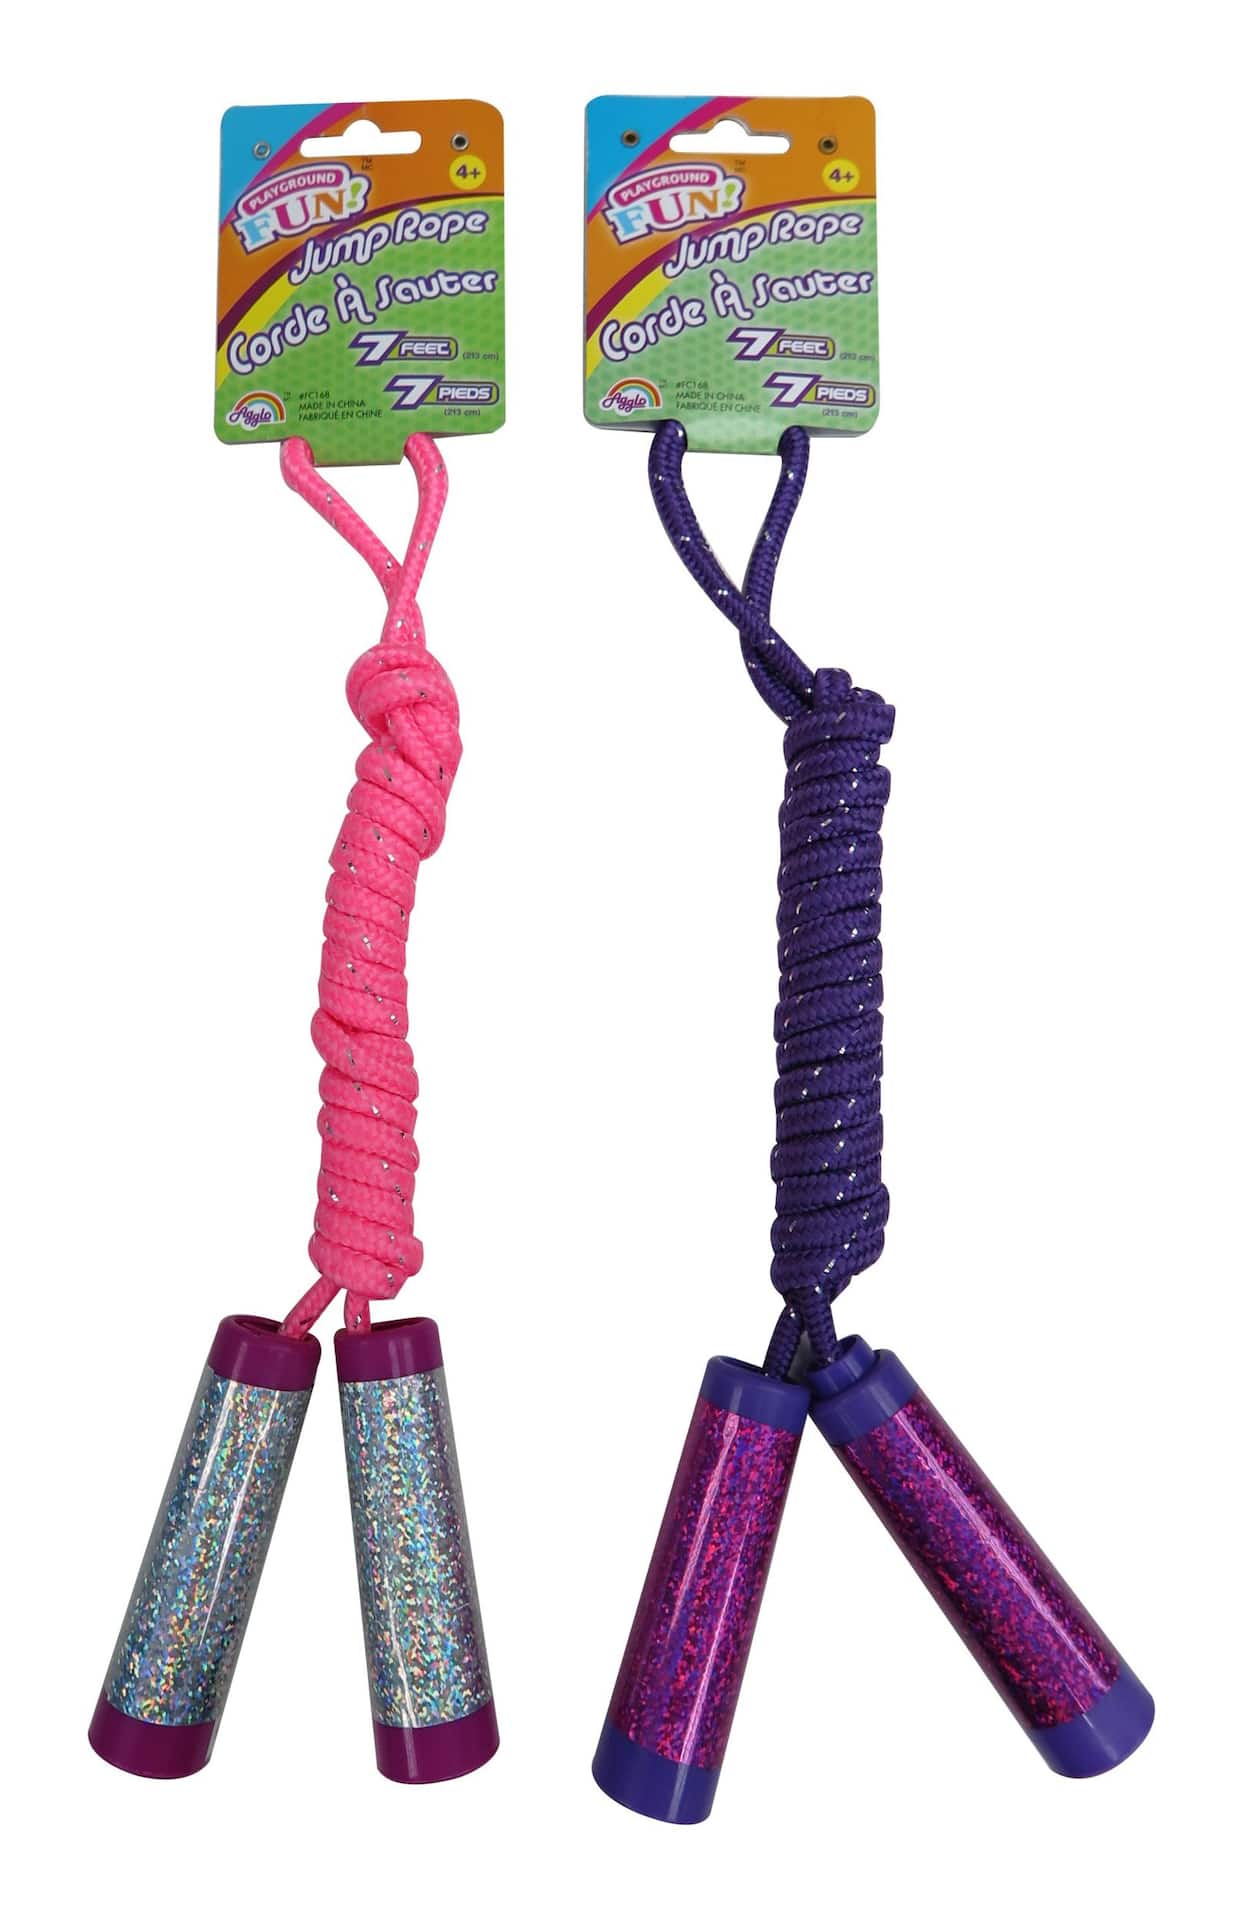 Sports Club Kids Adjustable Skipping/Jump Rope, Reflective Handles,  Assorted Age 4+, 7-Ft